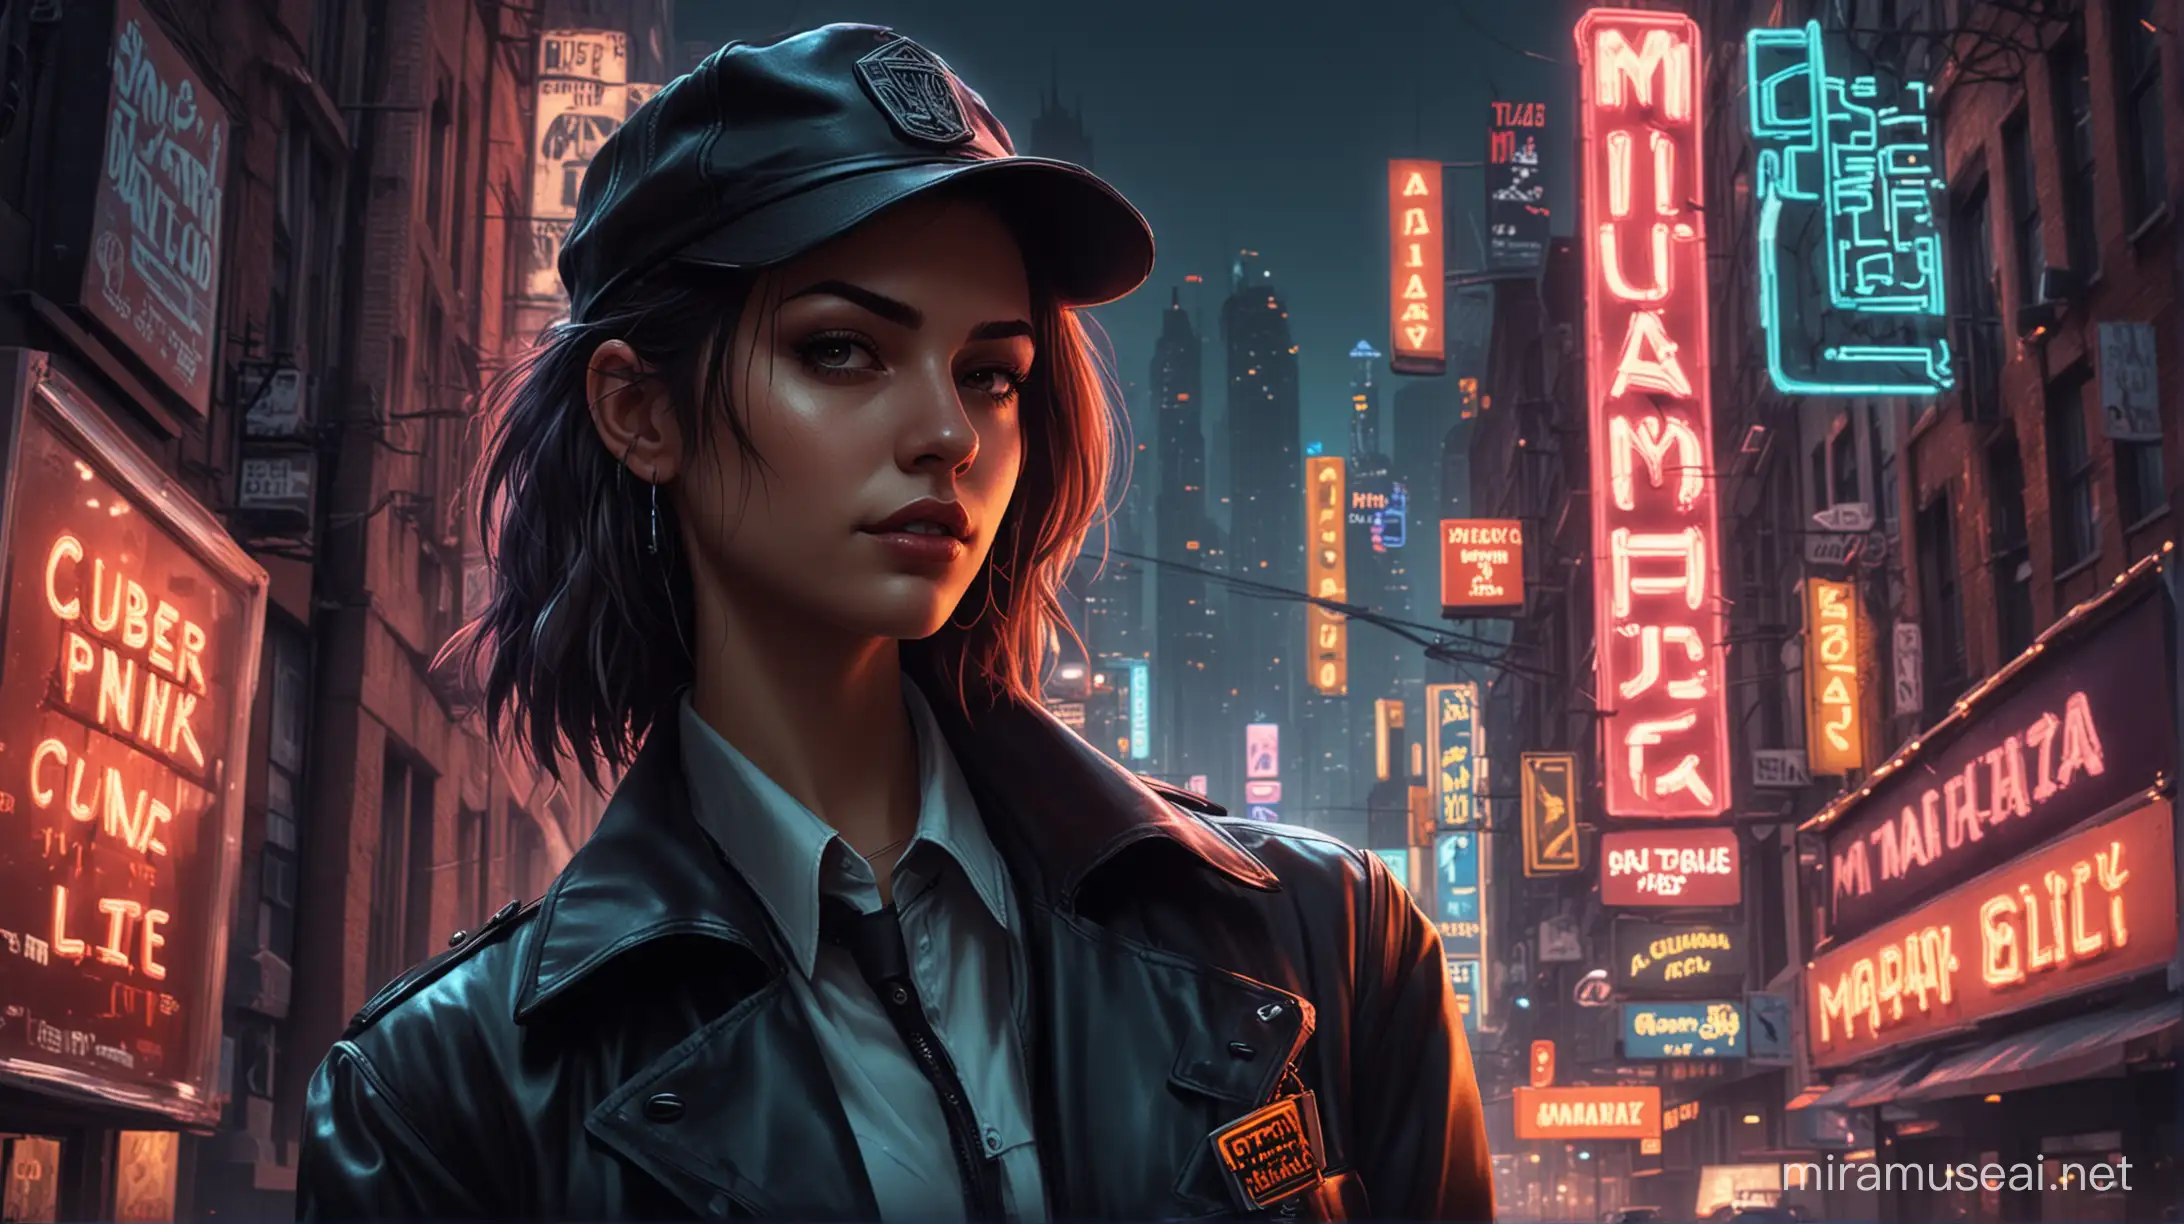 A female investigator character in a busy city with neon signs advertising Mafia Elite
Cuber punk style